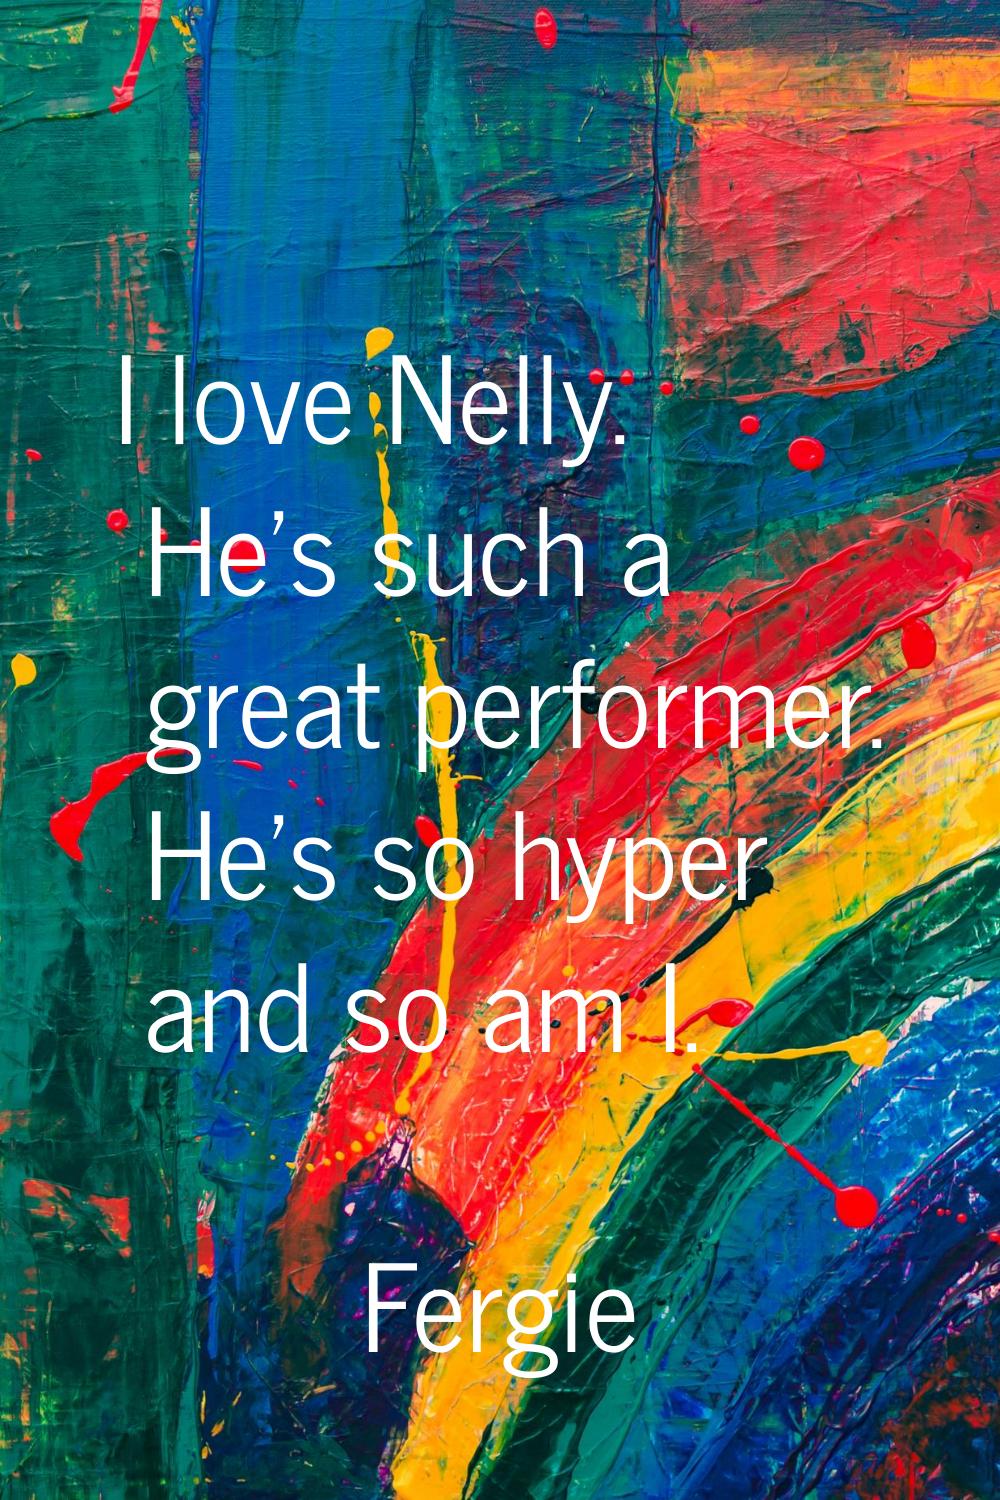 I love Nelly. He's such a great performer. He's so hyper and so am I.